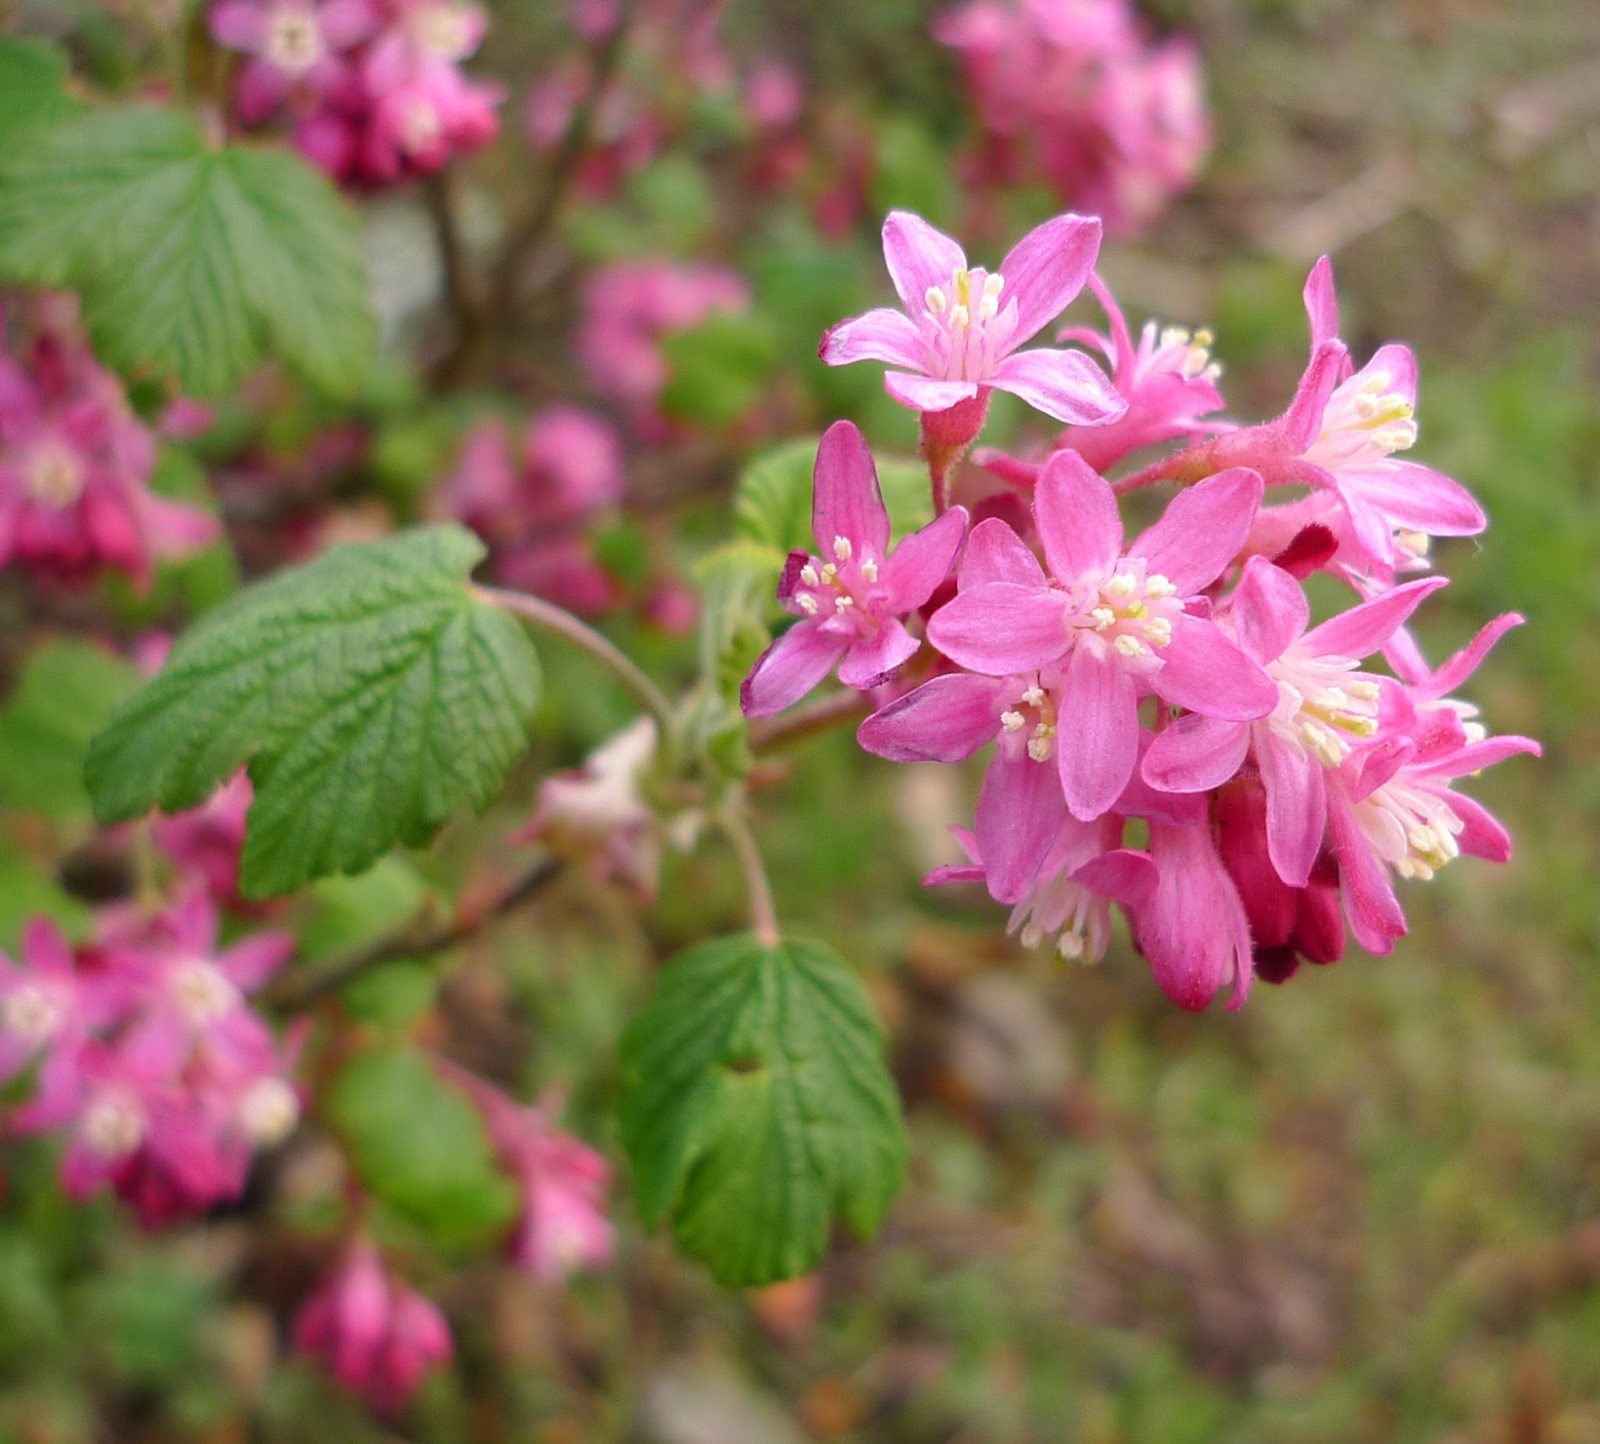 Wild Harvests: The News on Red Flowering Currant